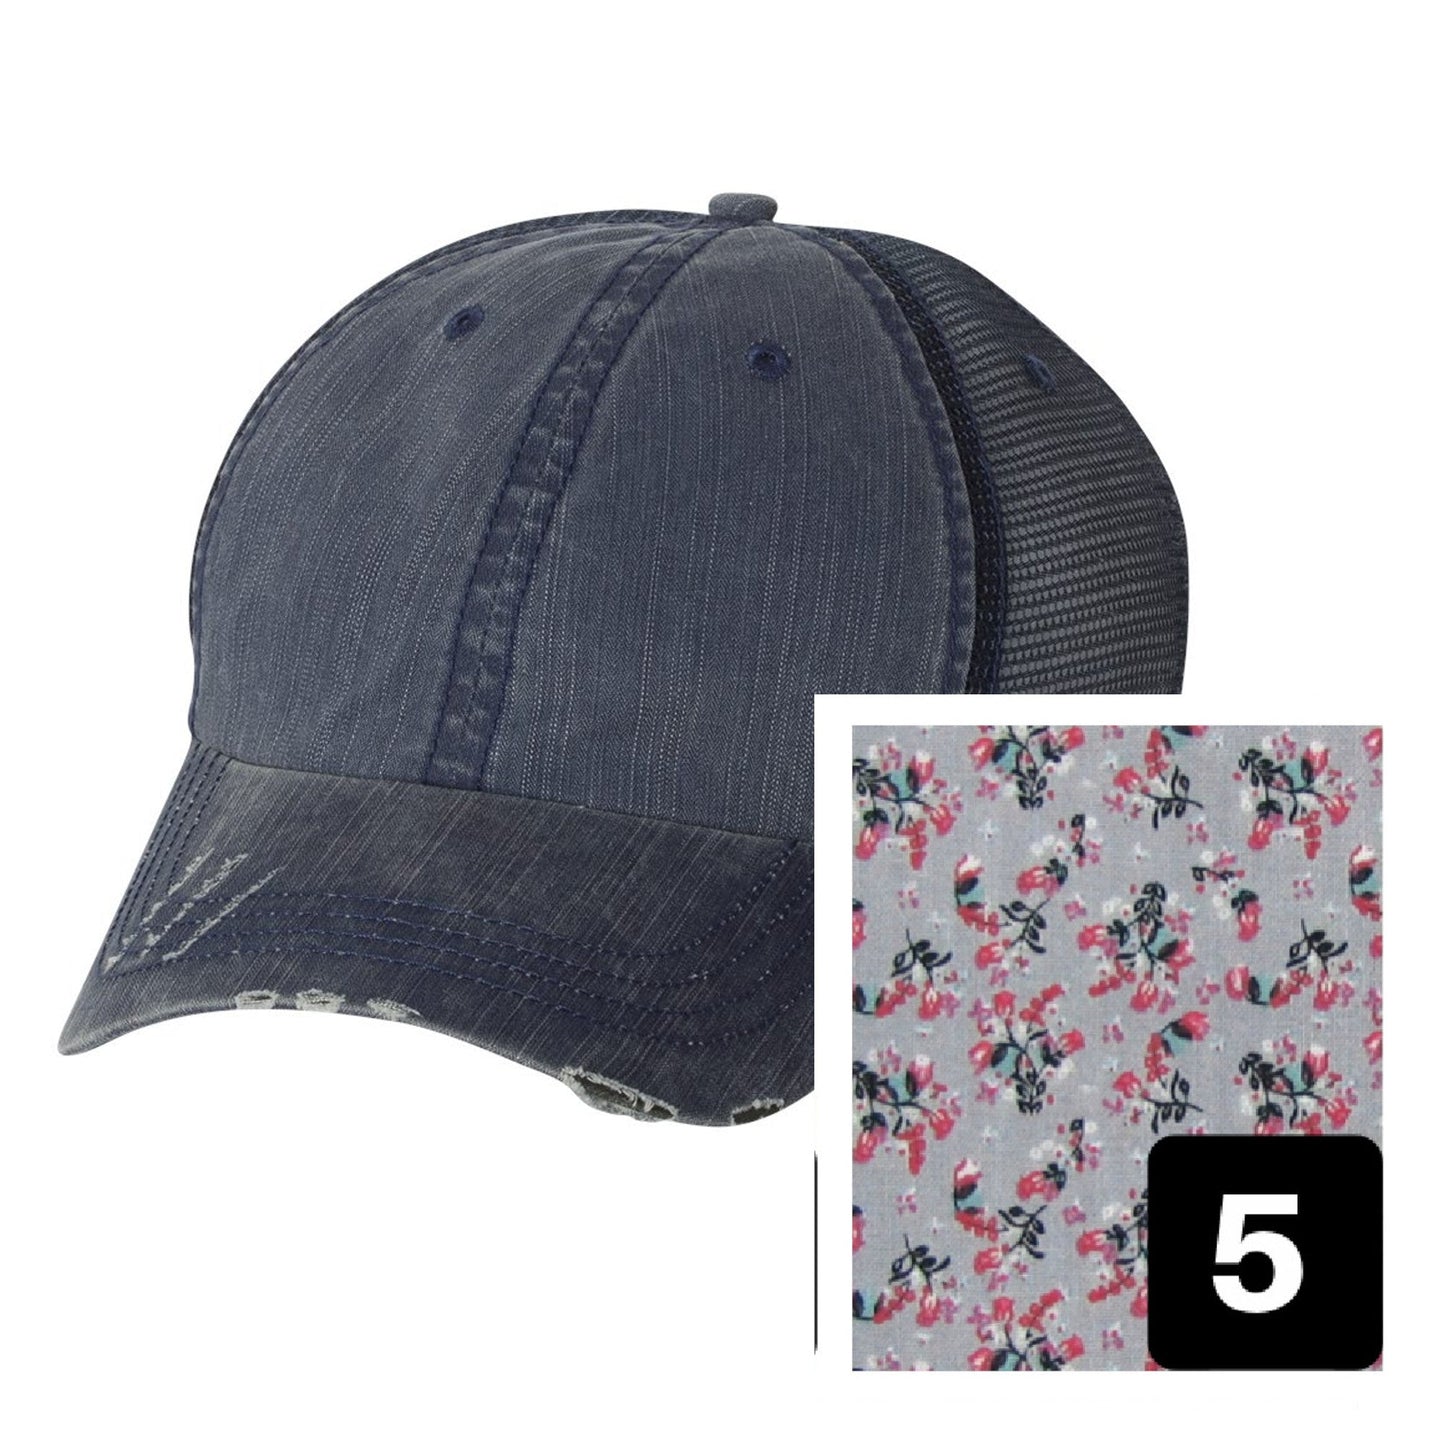 Vermont Hat | Navy Distressed Trucker Cap | Many Fabric Choices